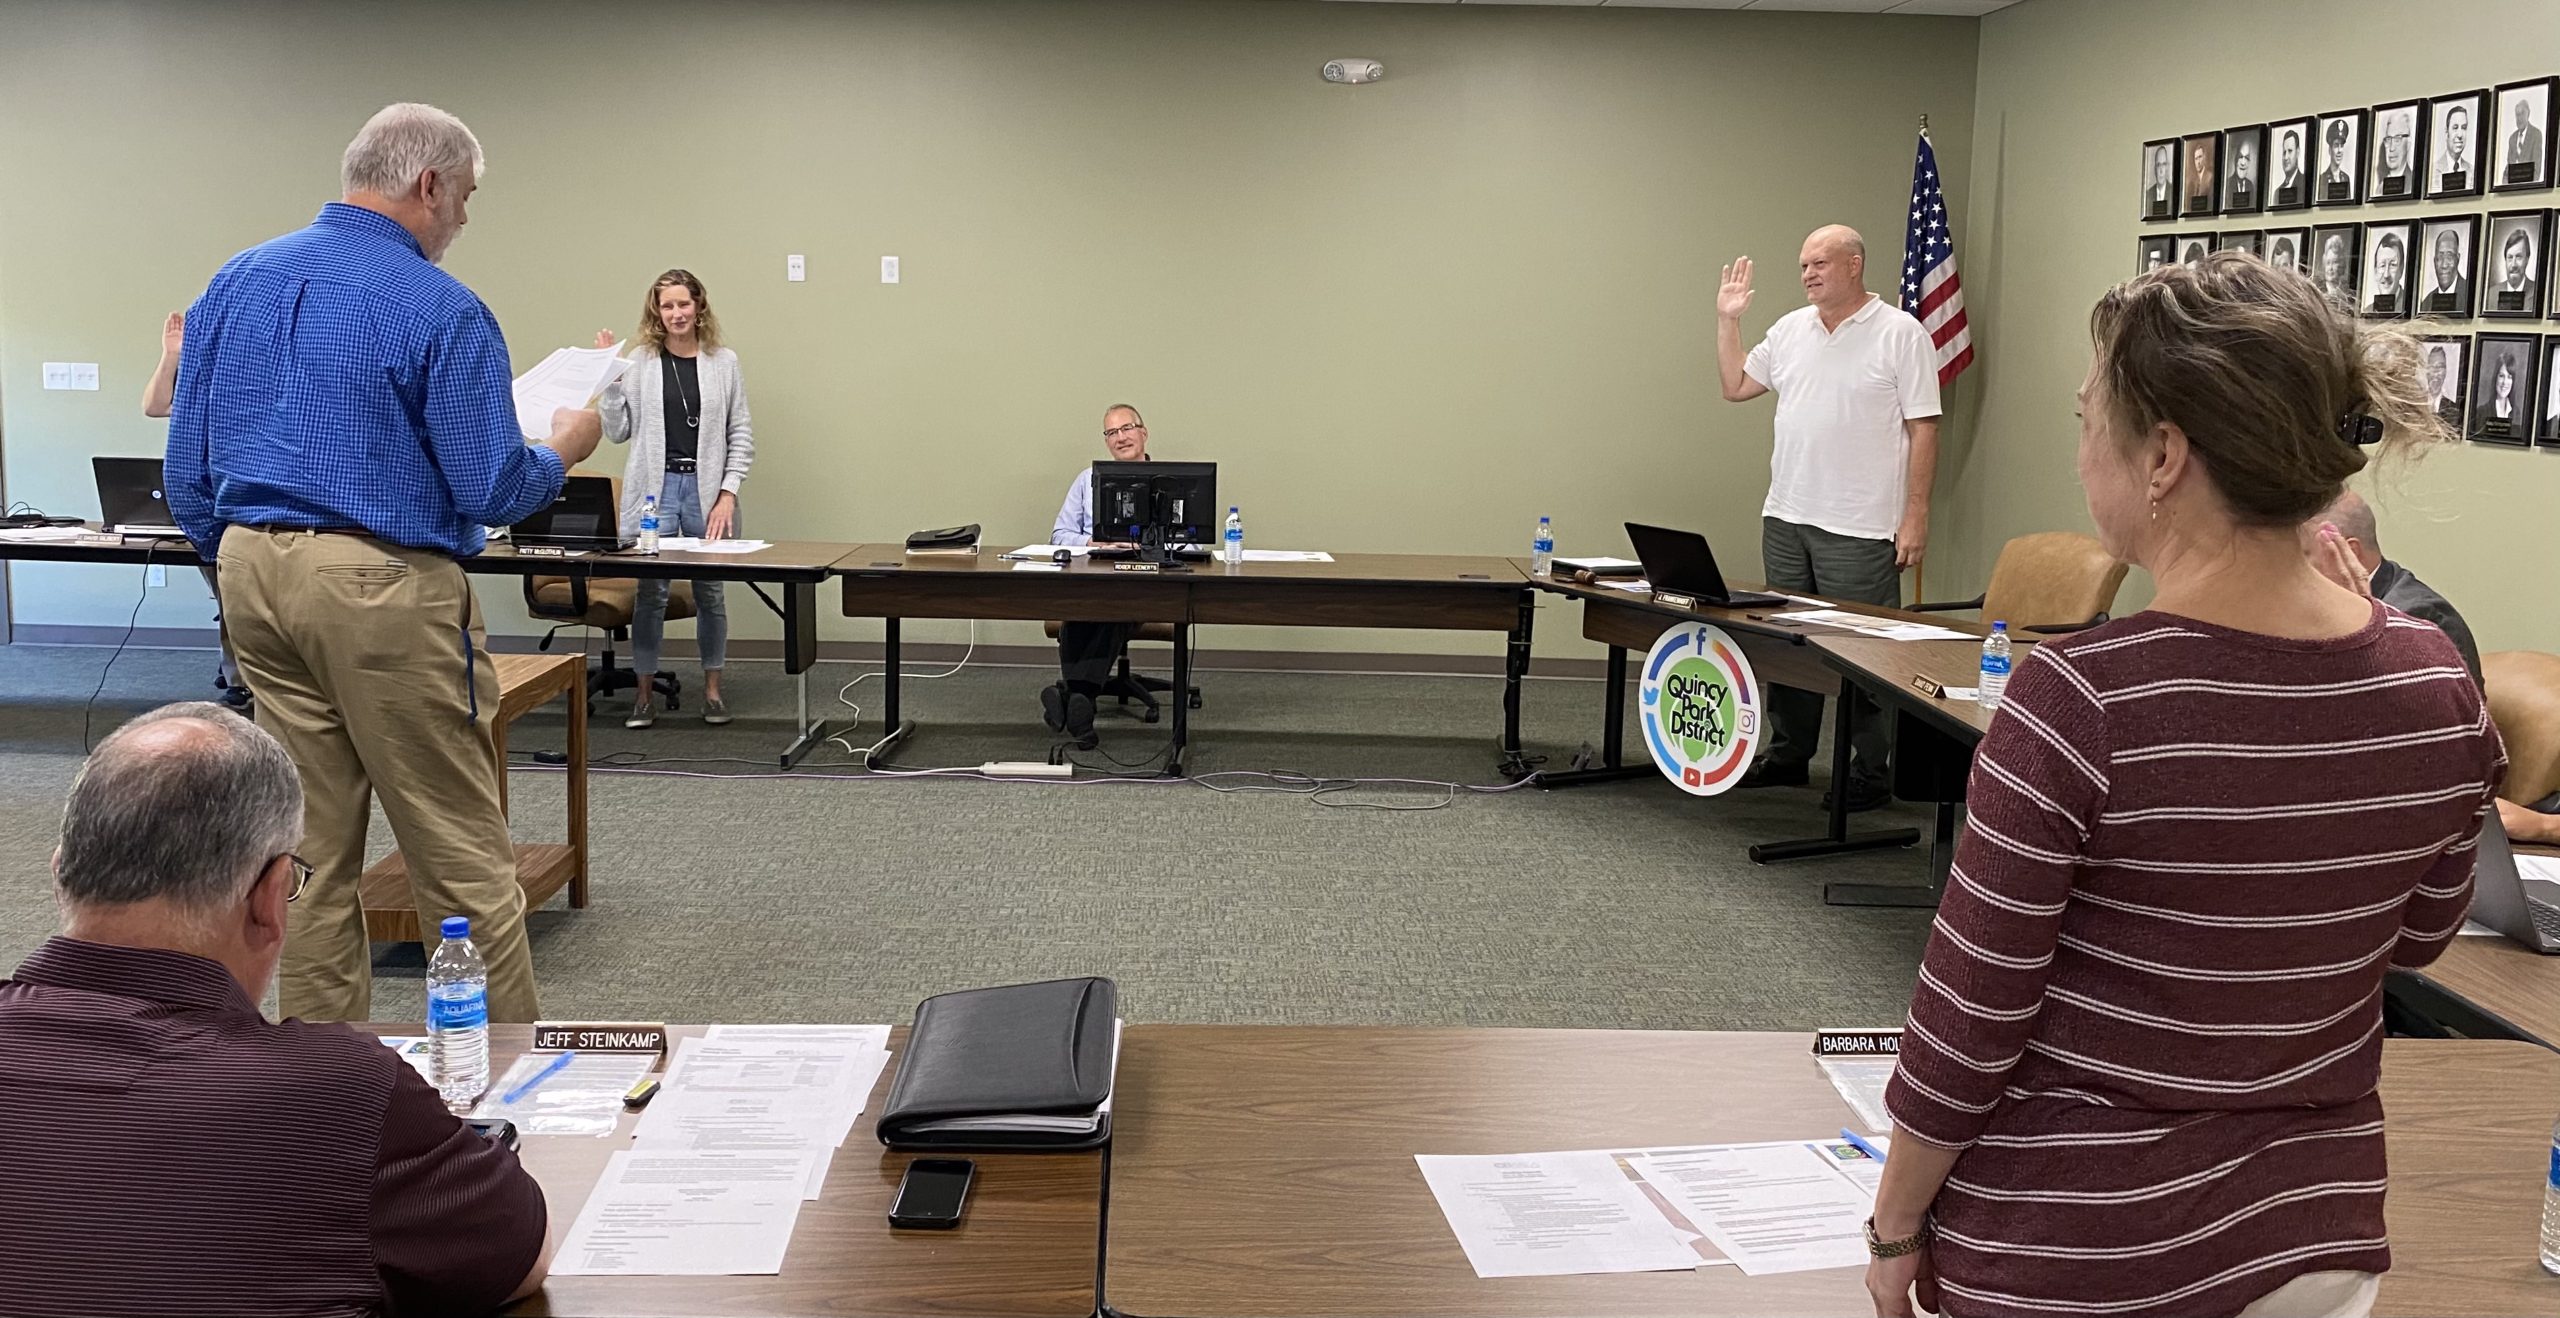 Don Hilgenbrinck, director of business services, swears in members of the Quincy Park District's Board of Commissioners during its May meeting on Wednesday, May 12. Standing are Patty McGlothlin, left, and John Frankenhoff, while Barb Holthaus has her back to the camera. Seated is Roger Leenerts, who was elected as the board president during the meeting. Also sworn in as a commissioner was J. David Gilbert, not pictured.